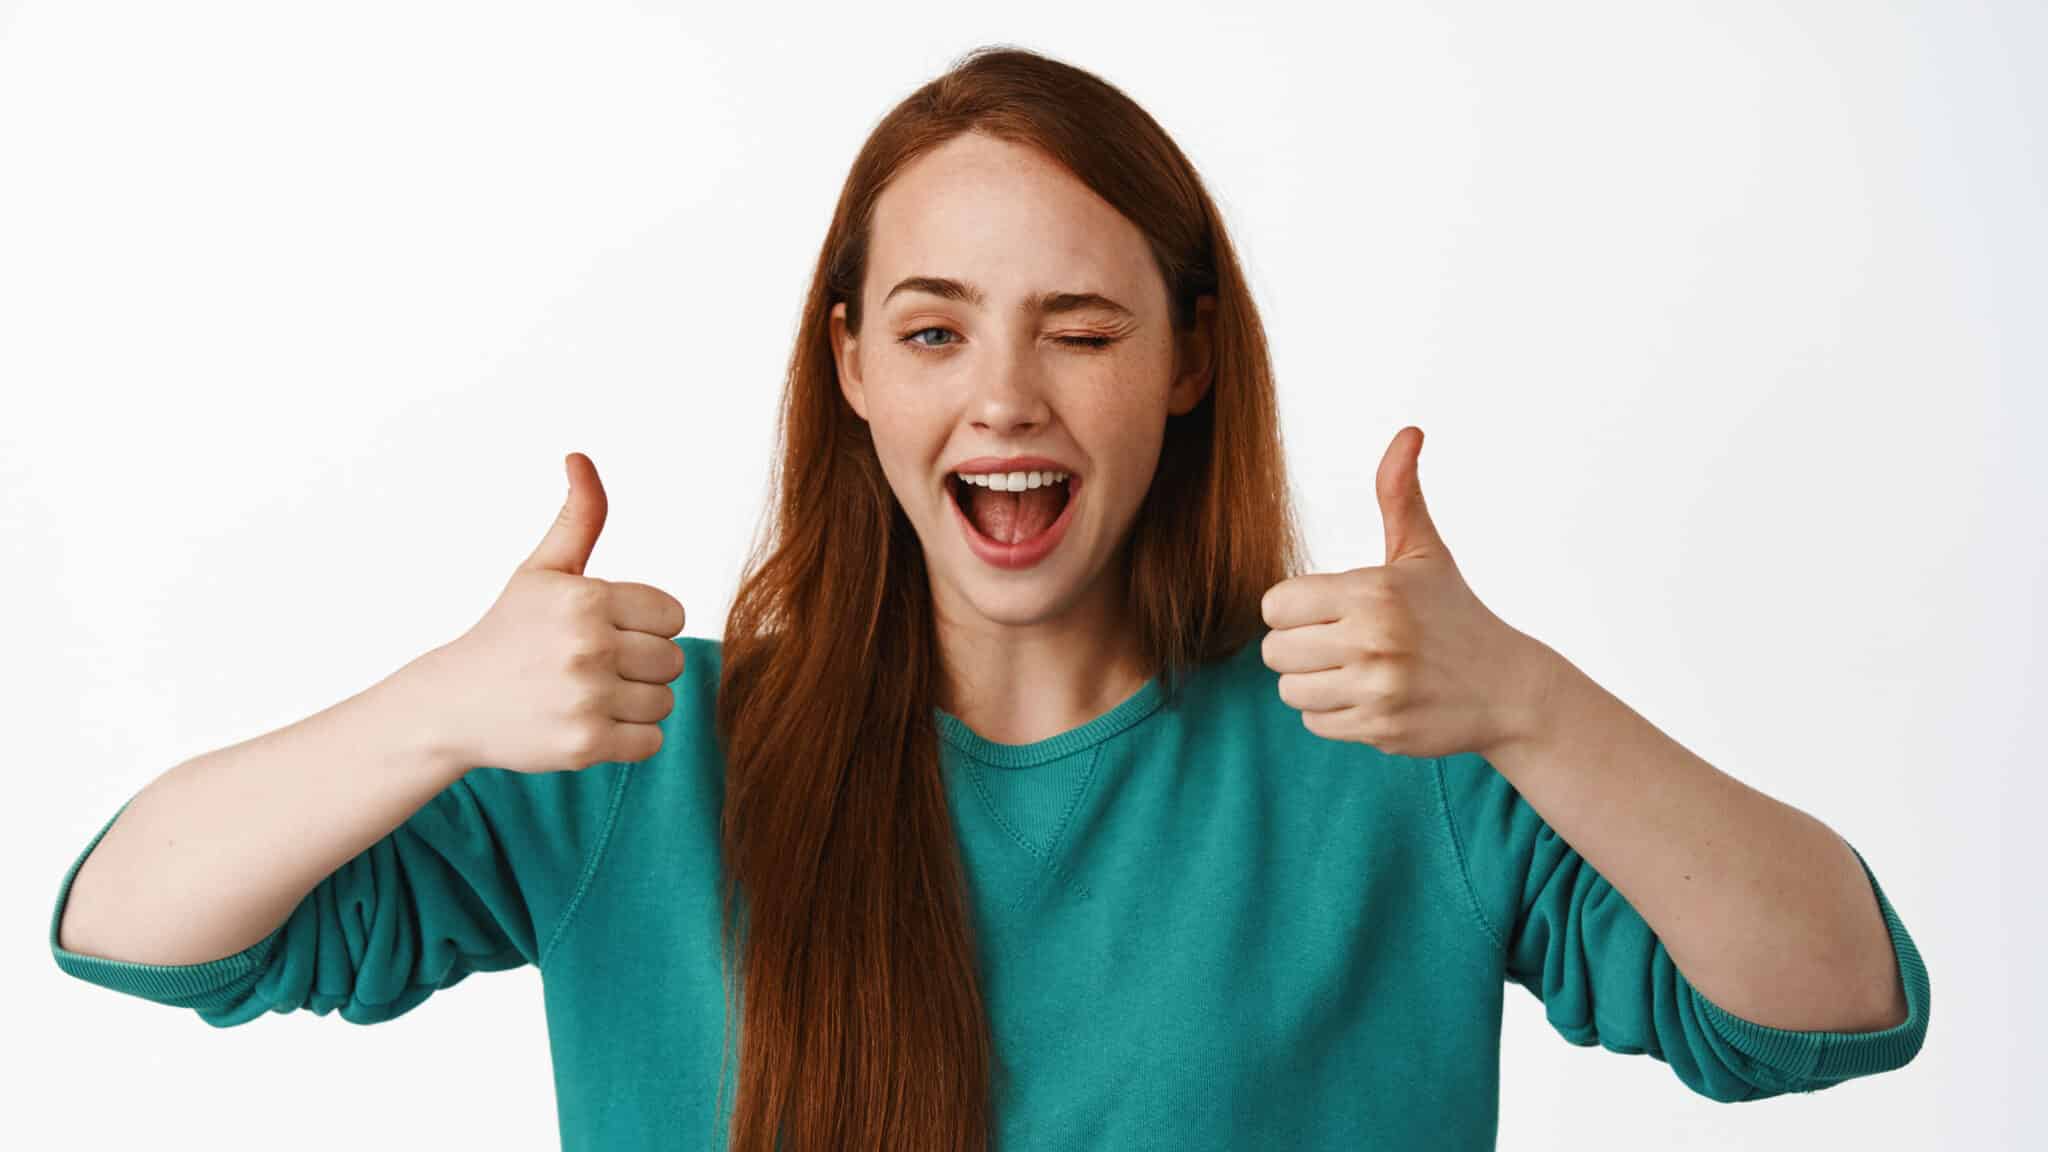 well done smiling redhead girl winking show thumbs up like approve praise nice job great work gesture hinting something good recommend service edited scaled - Emir Al Kafadji